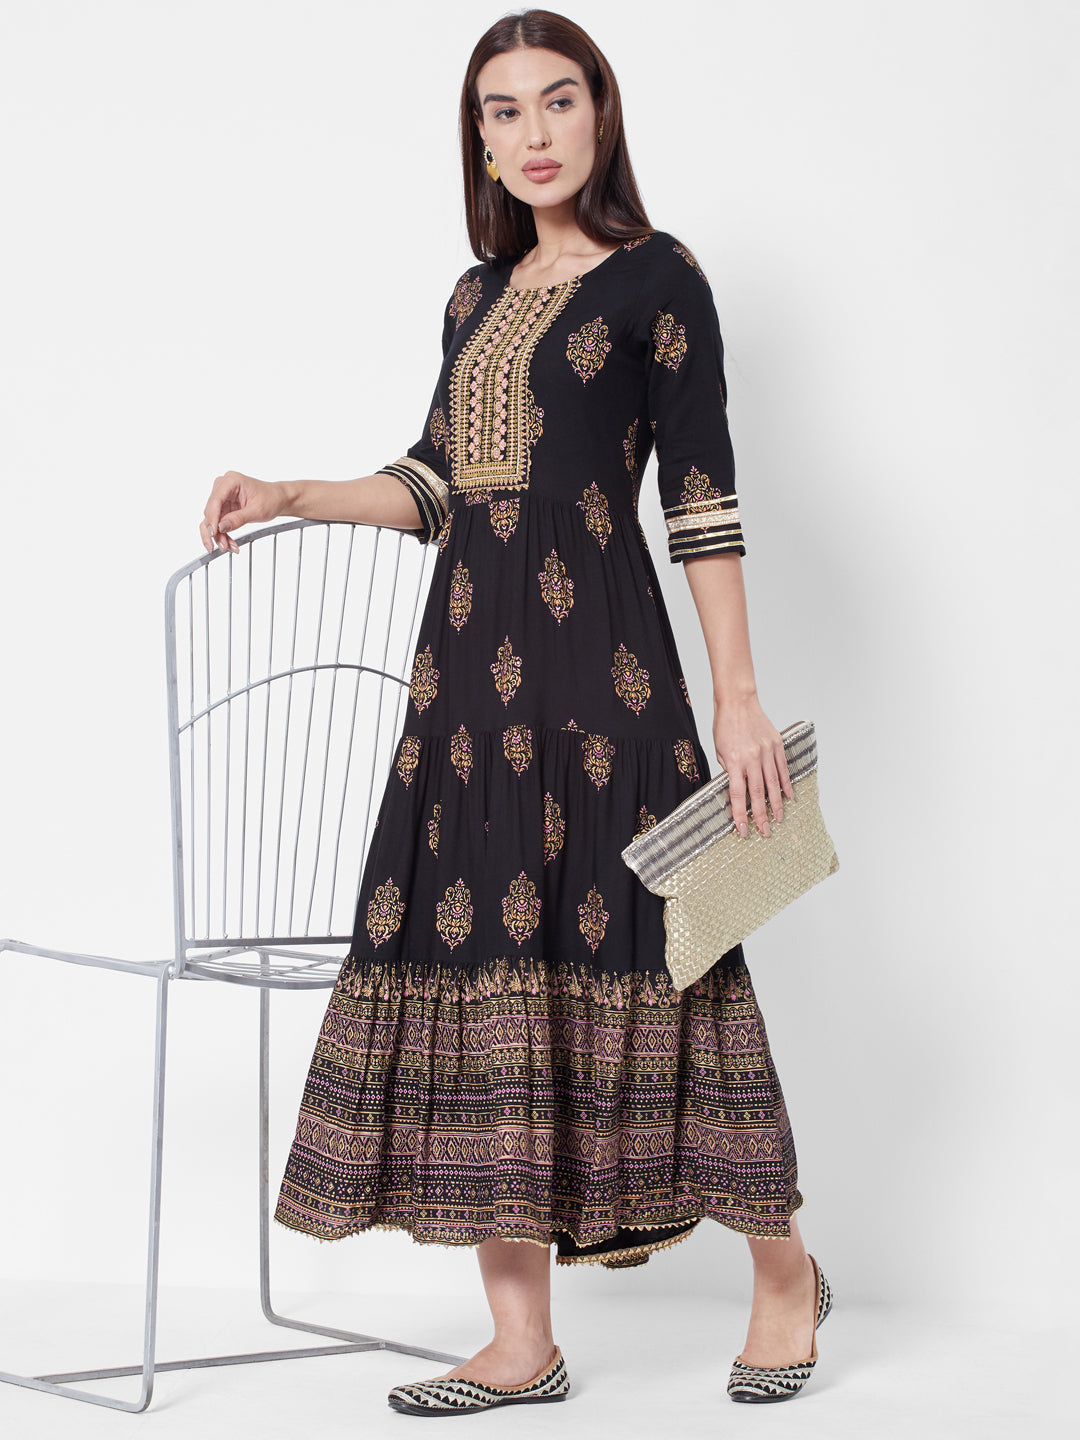 Vedic Ethnic Motifs Printed Tiered A-Line Ethnic Dress